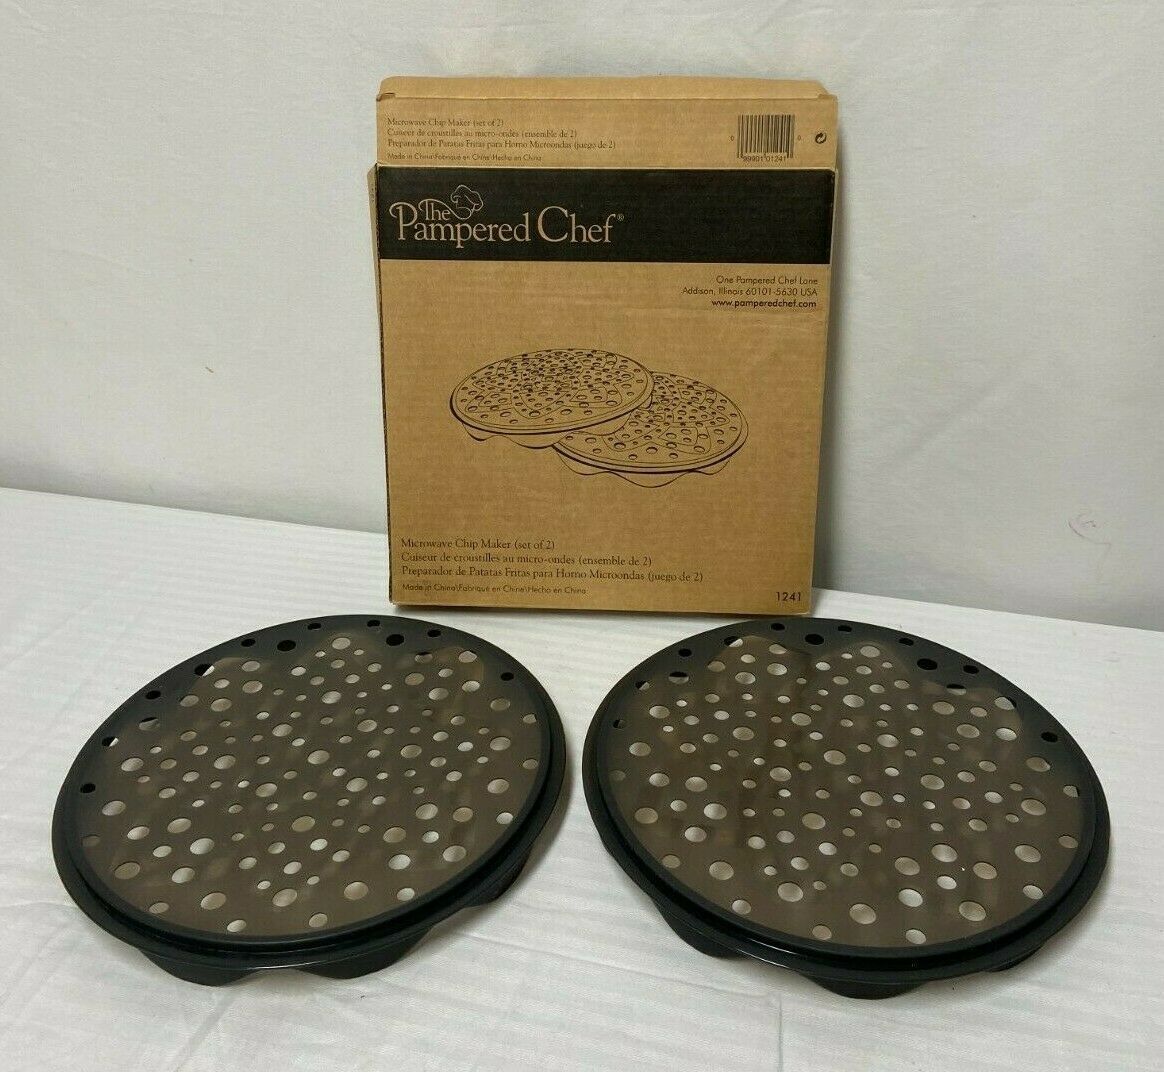 2 Pampered Chef Microwave Chip Maker 1241 - $14.49